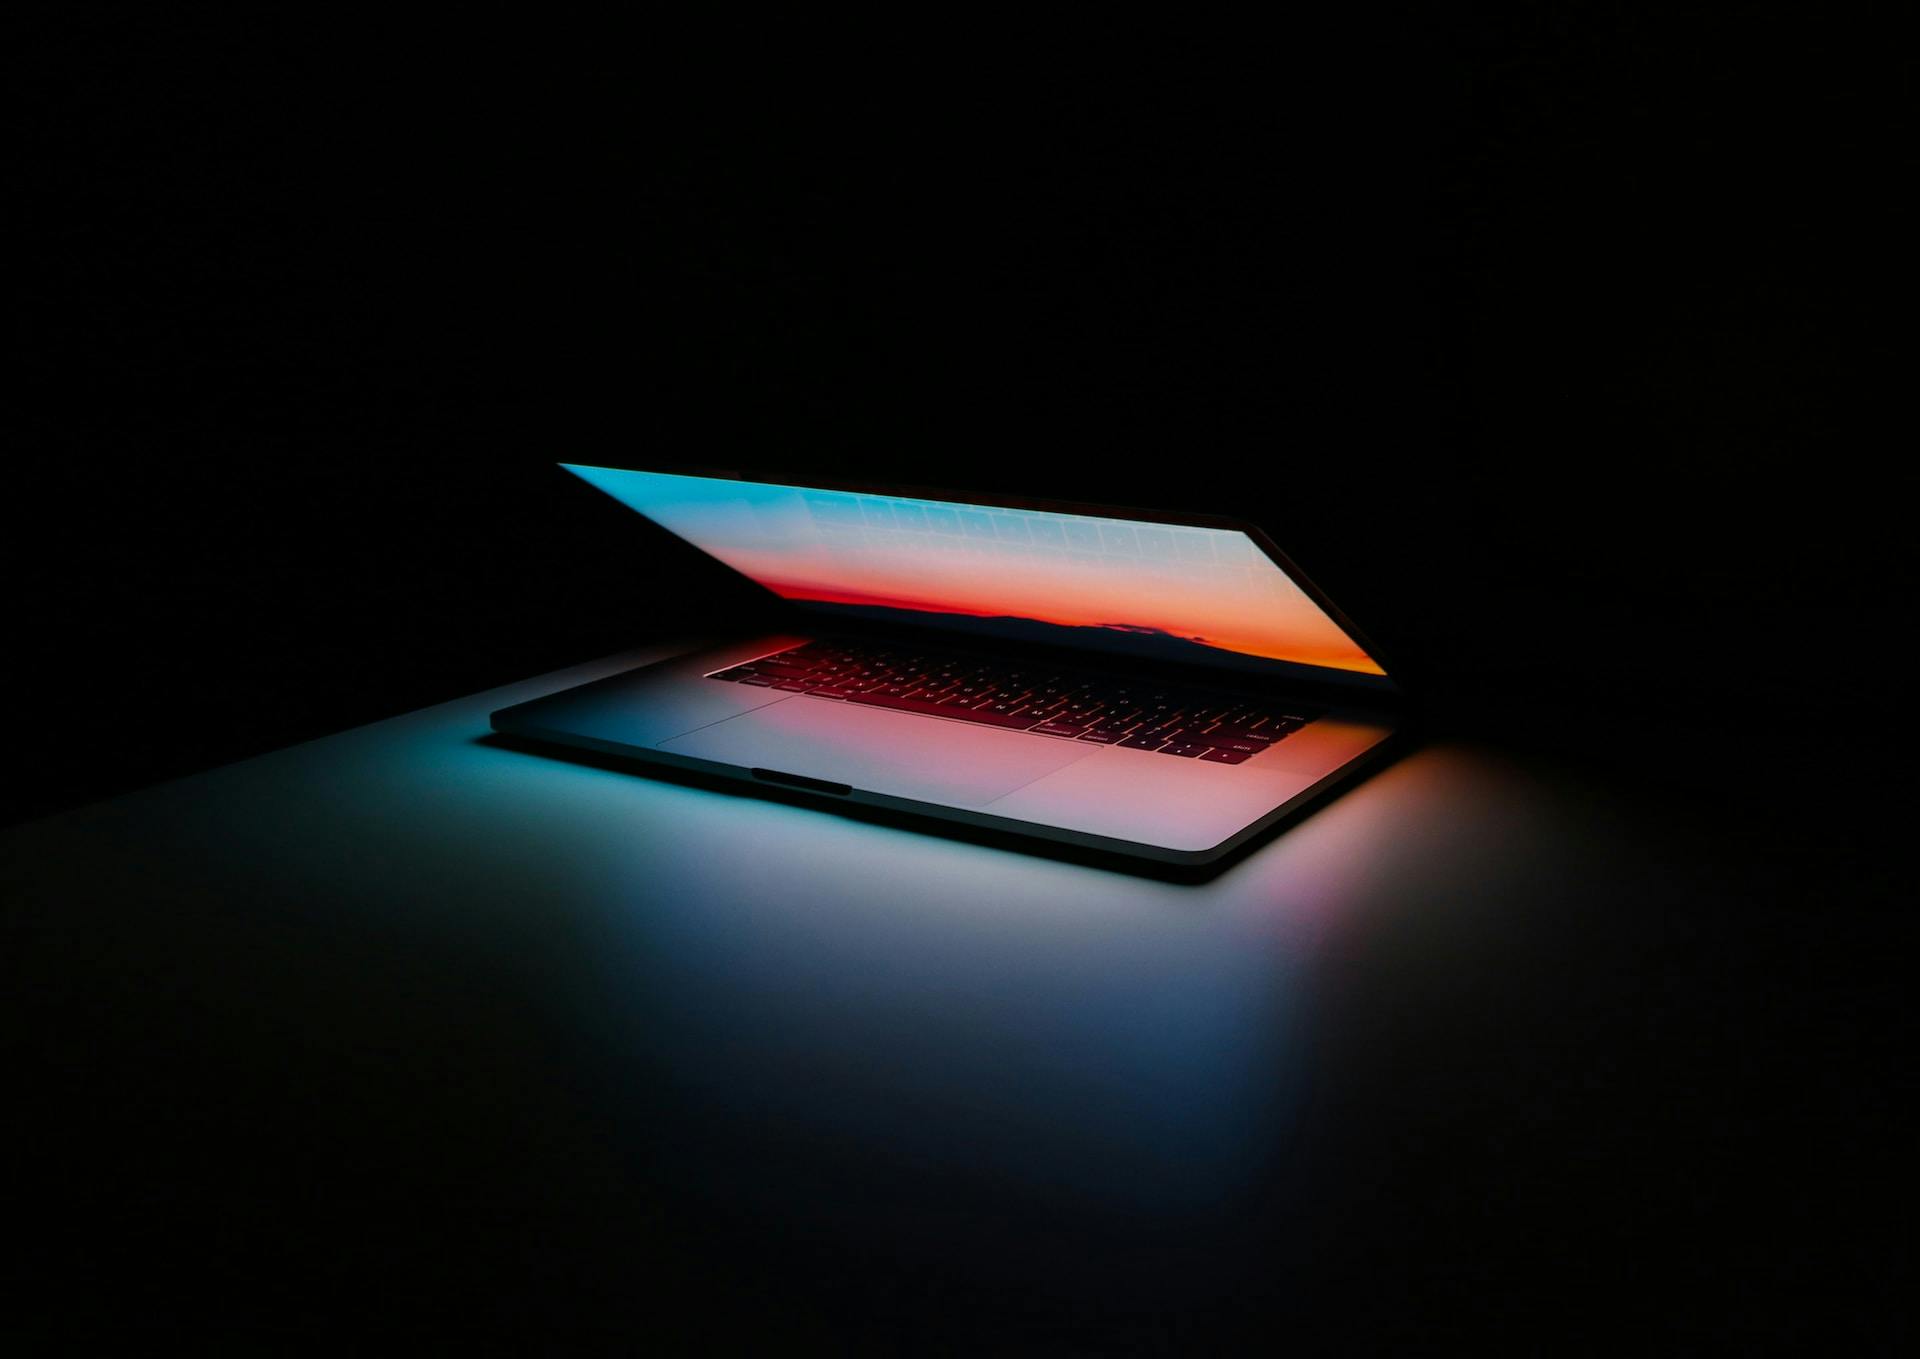 A laptop computer in a dark room with vibrant colors coming from the screen.